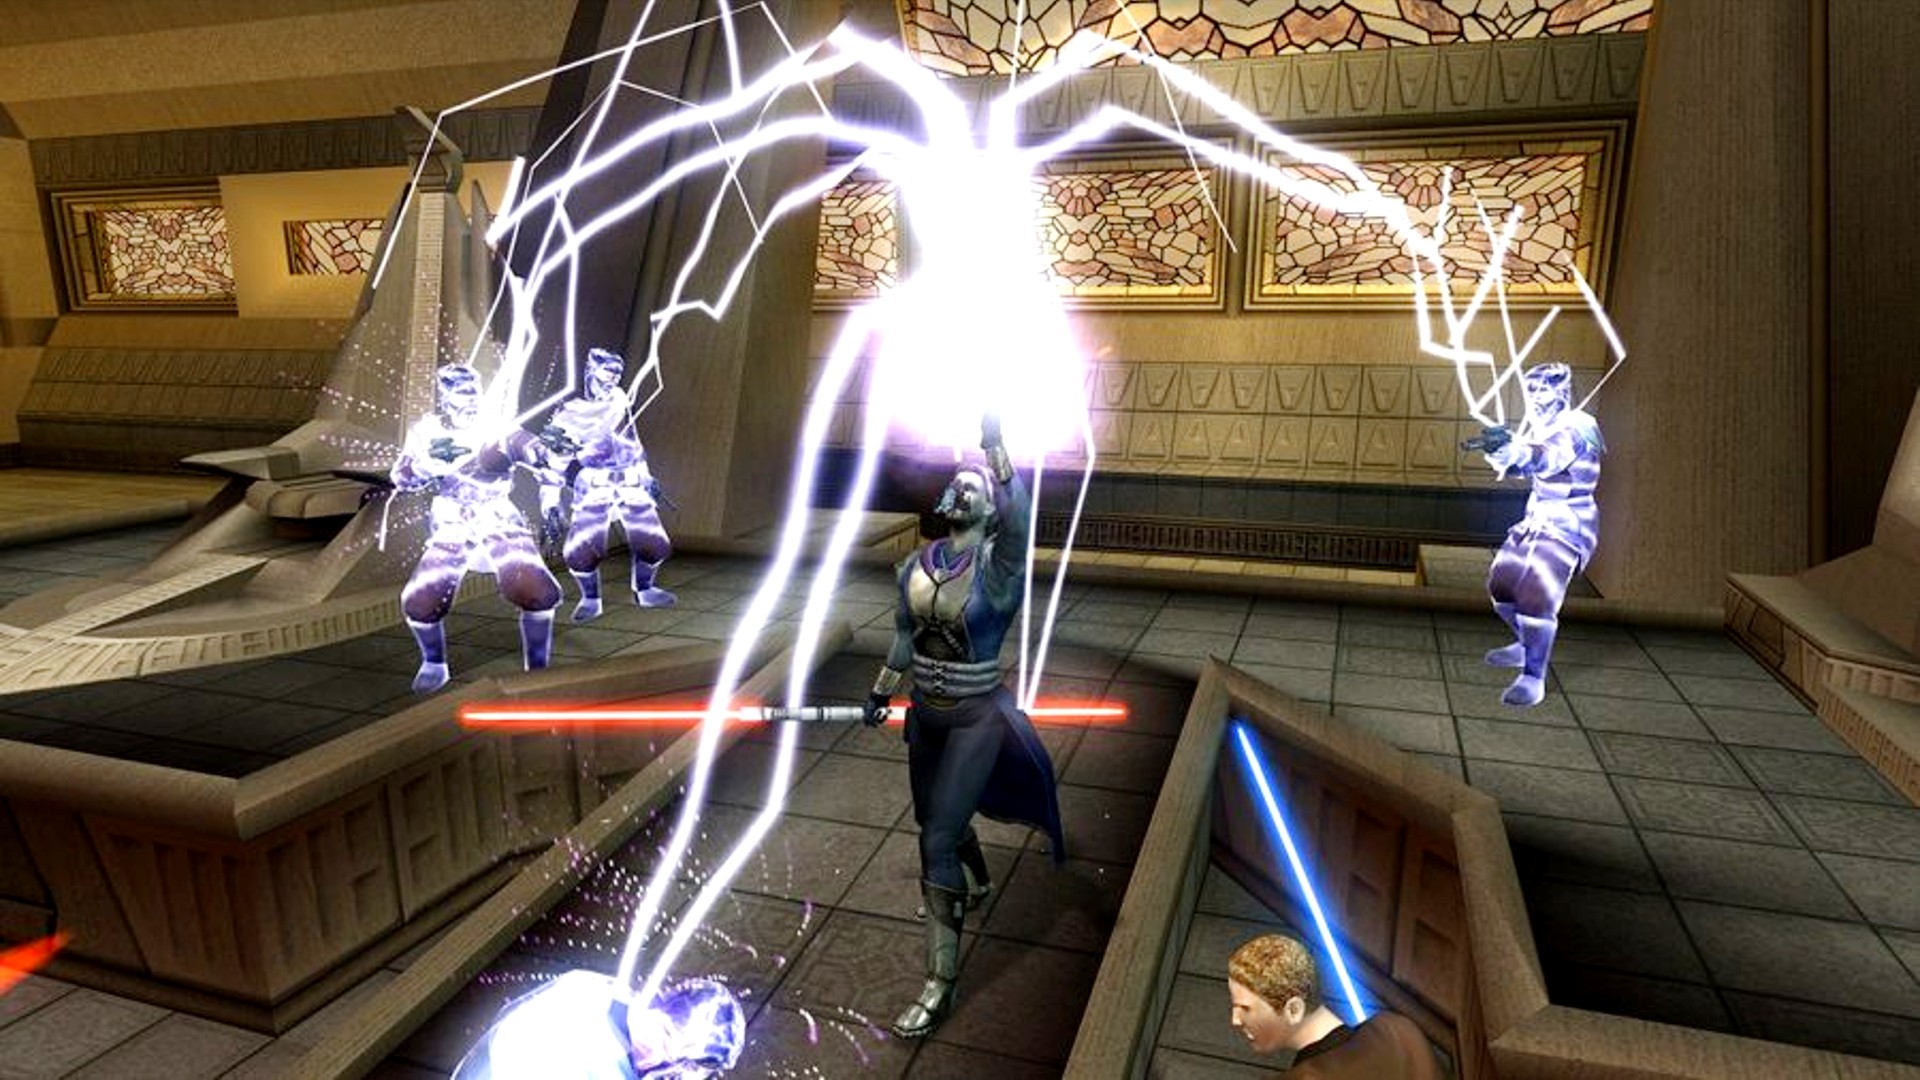 Best RPG games: Star Wars: Knights of the Old Republic 2. Image shows a Jedi attacking two foes with force lightning.